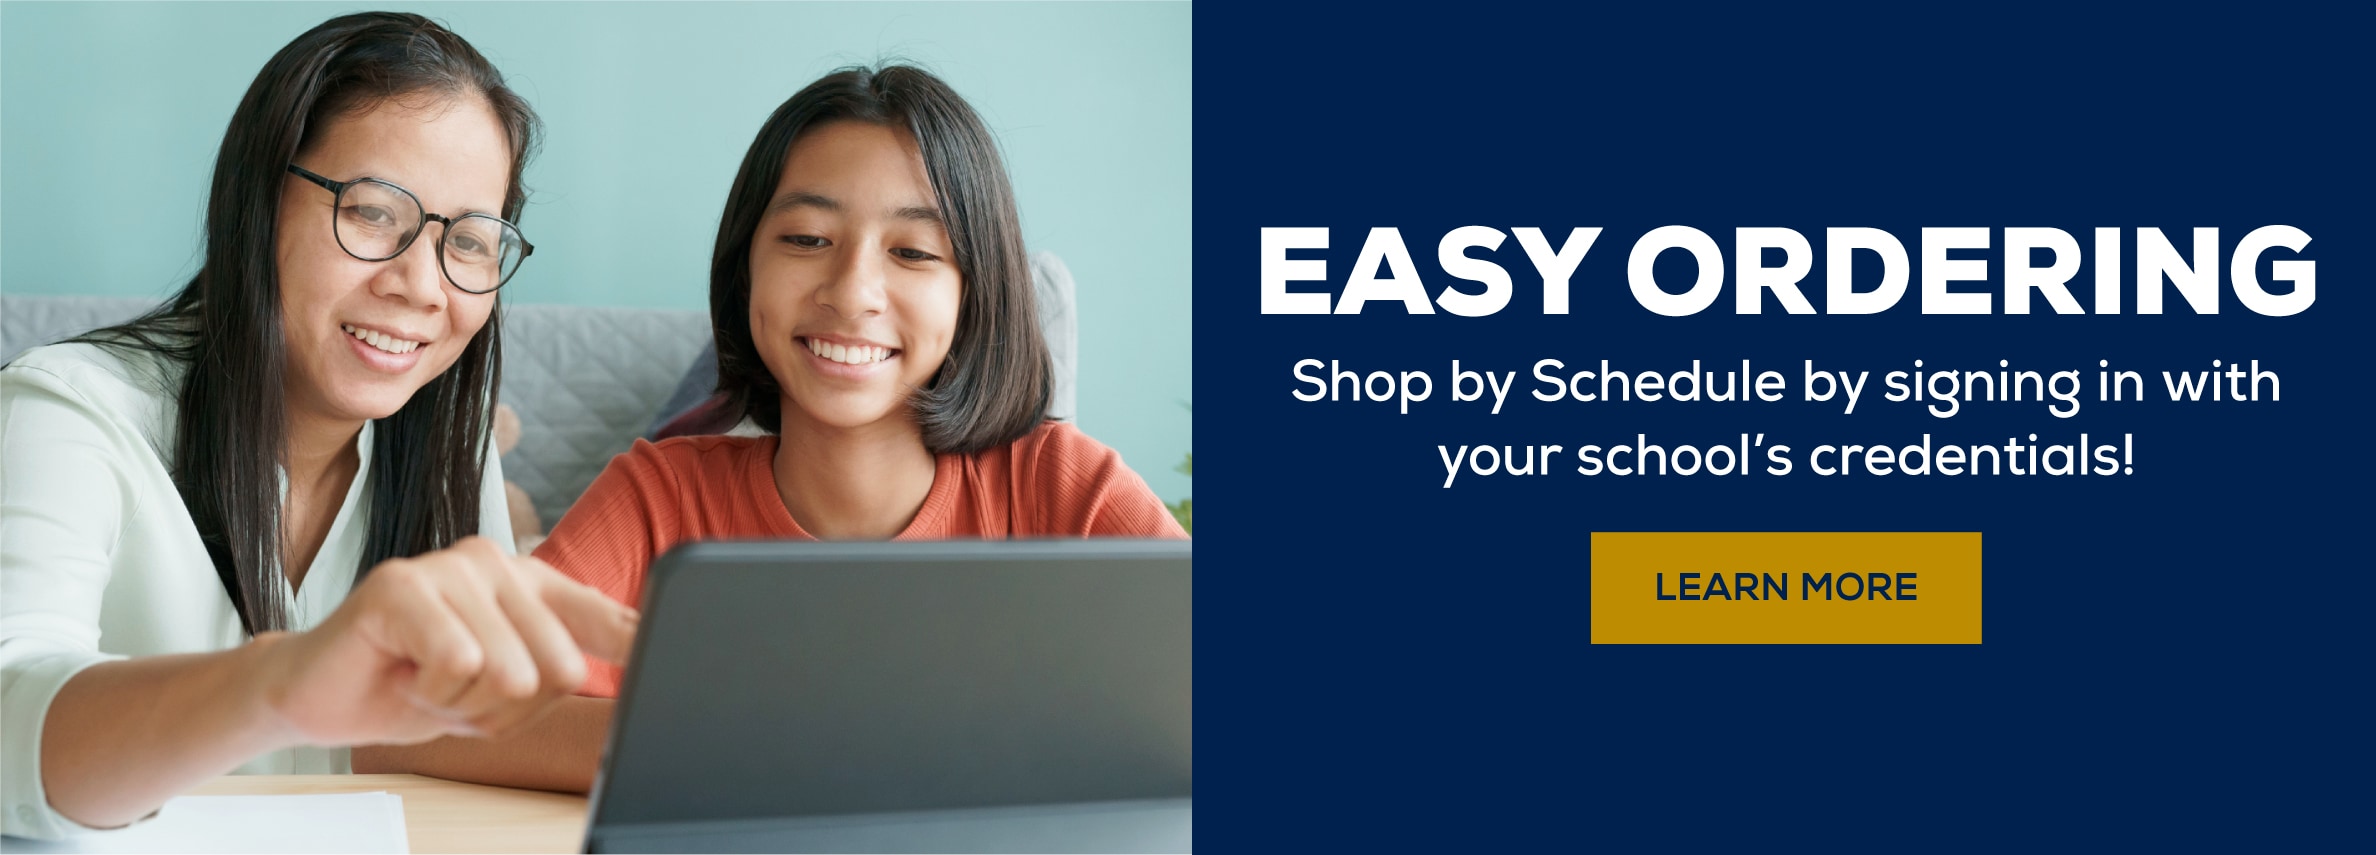 Easy Ordering. Shop by schedule by signing in with your schoolÃ¢â‚¬â„¢s credentials. Learn more.